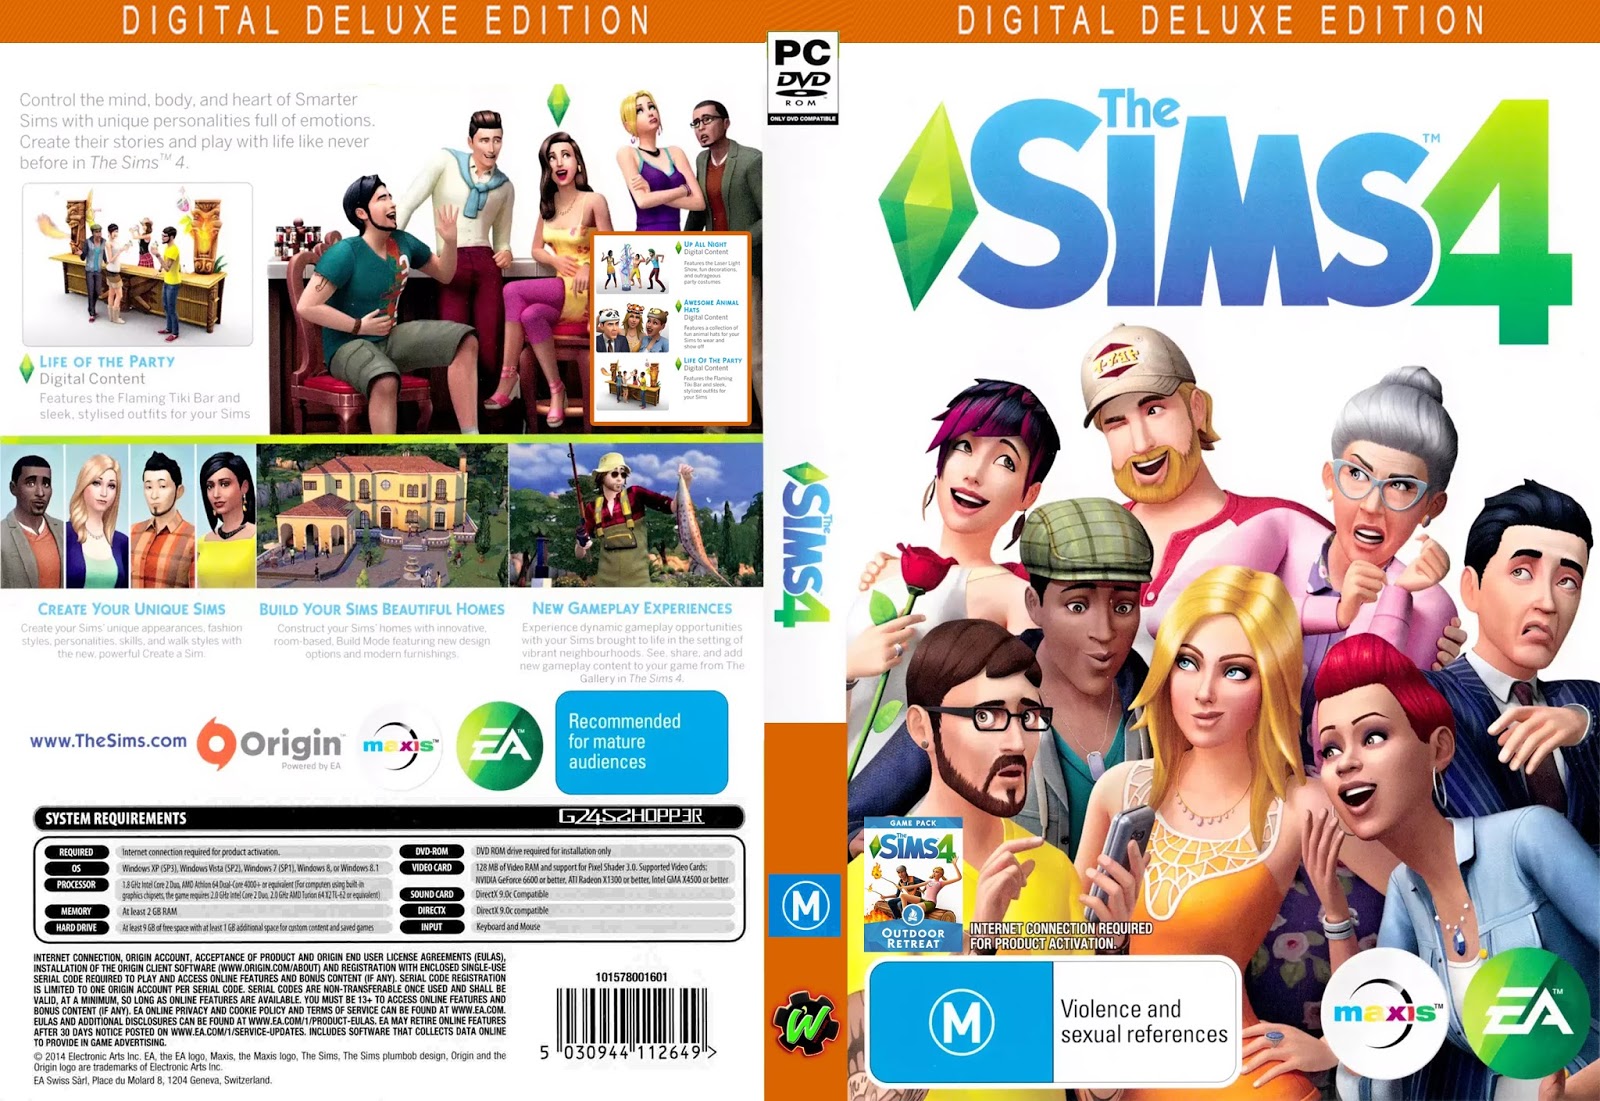 sims 4 deluxe download free full game